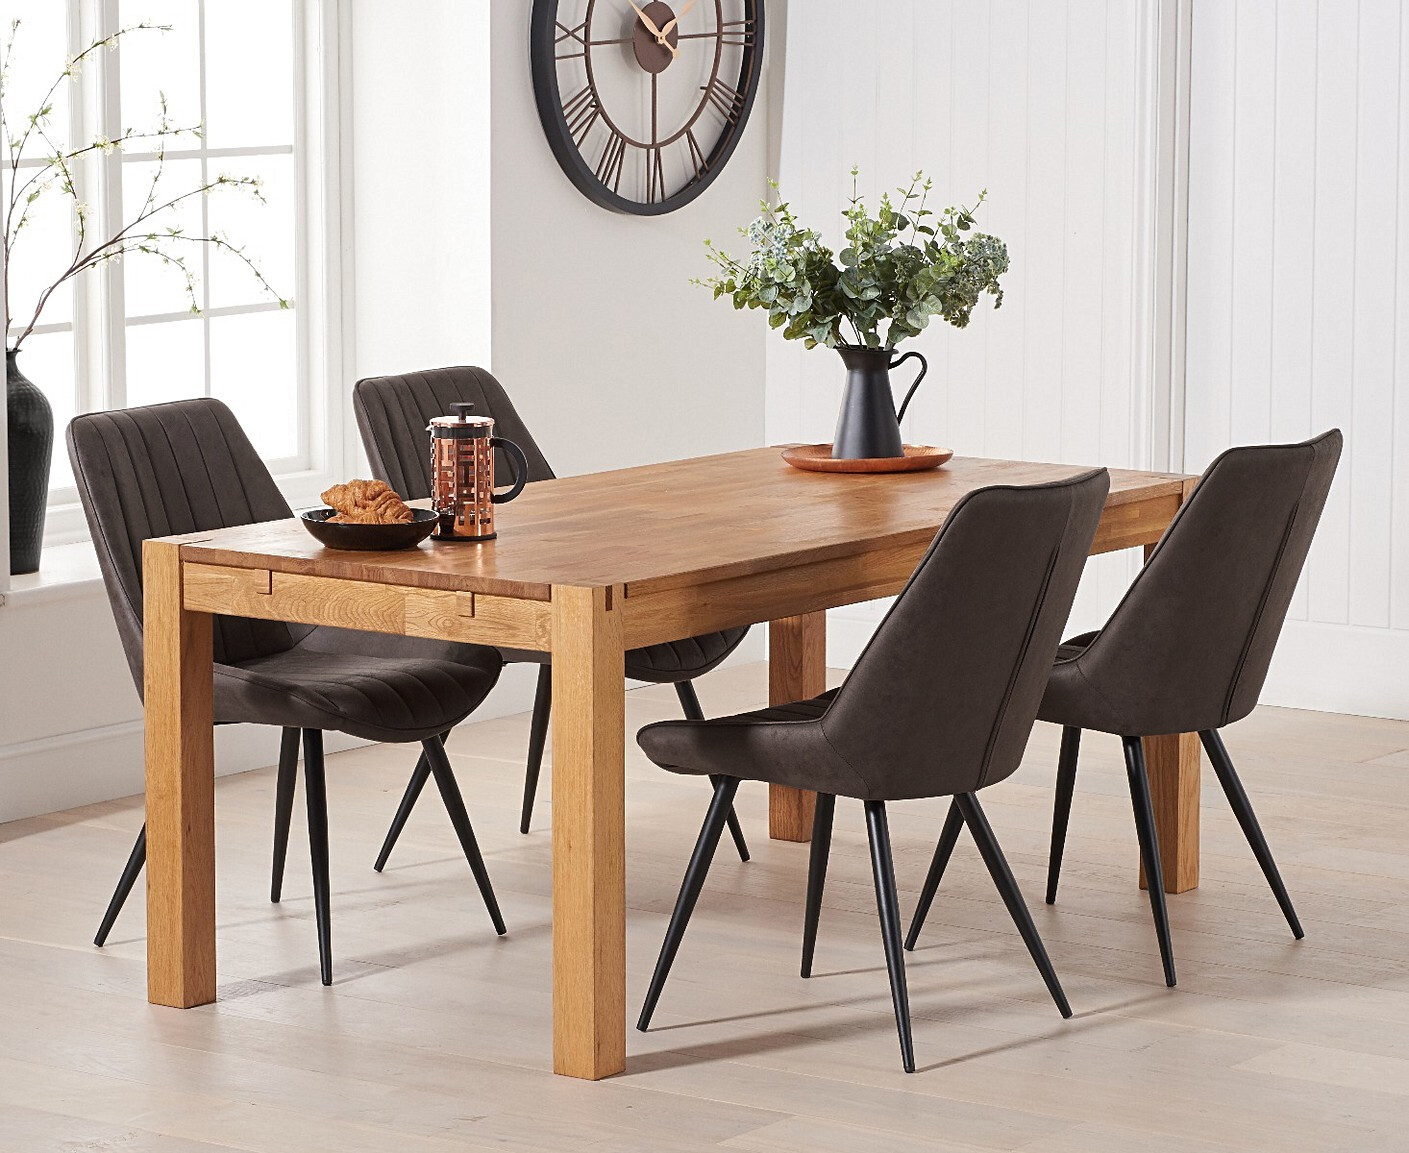 Photo 2 of Thetford 150cm oak dining table with 6 brown brody chairs